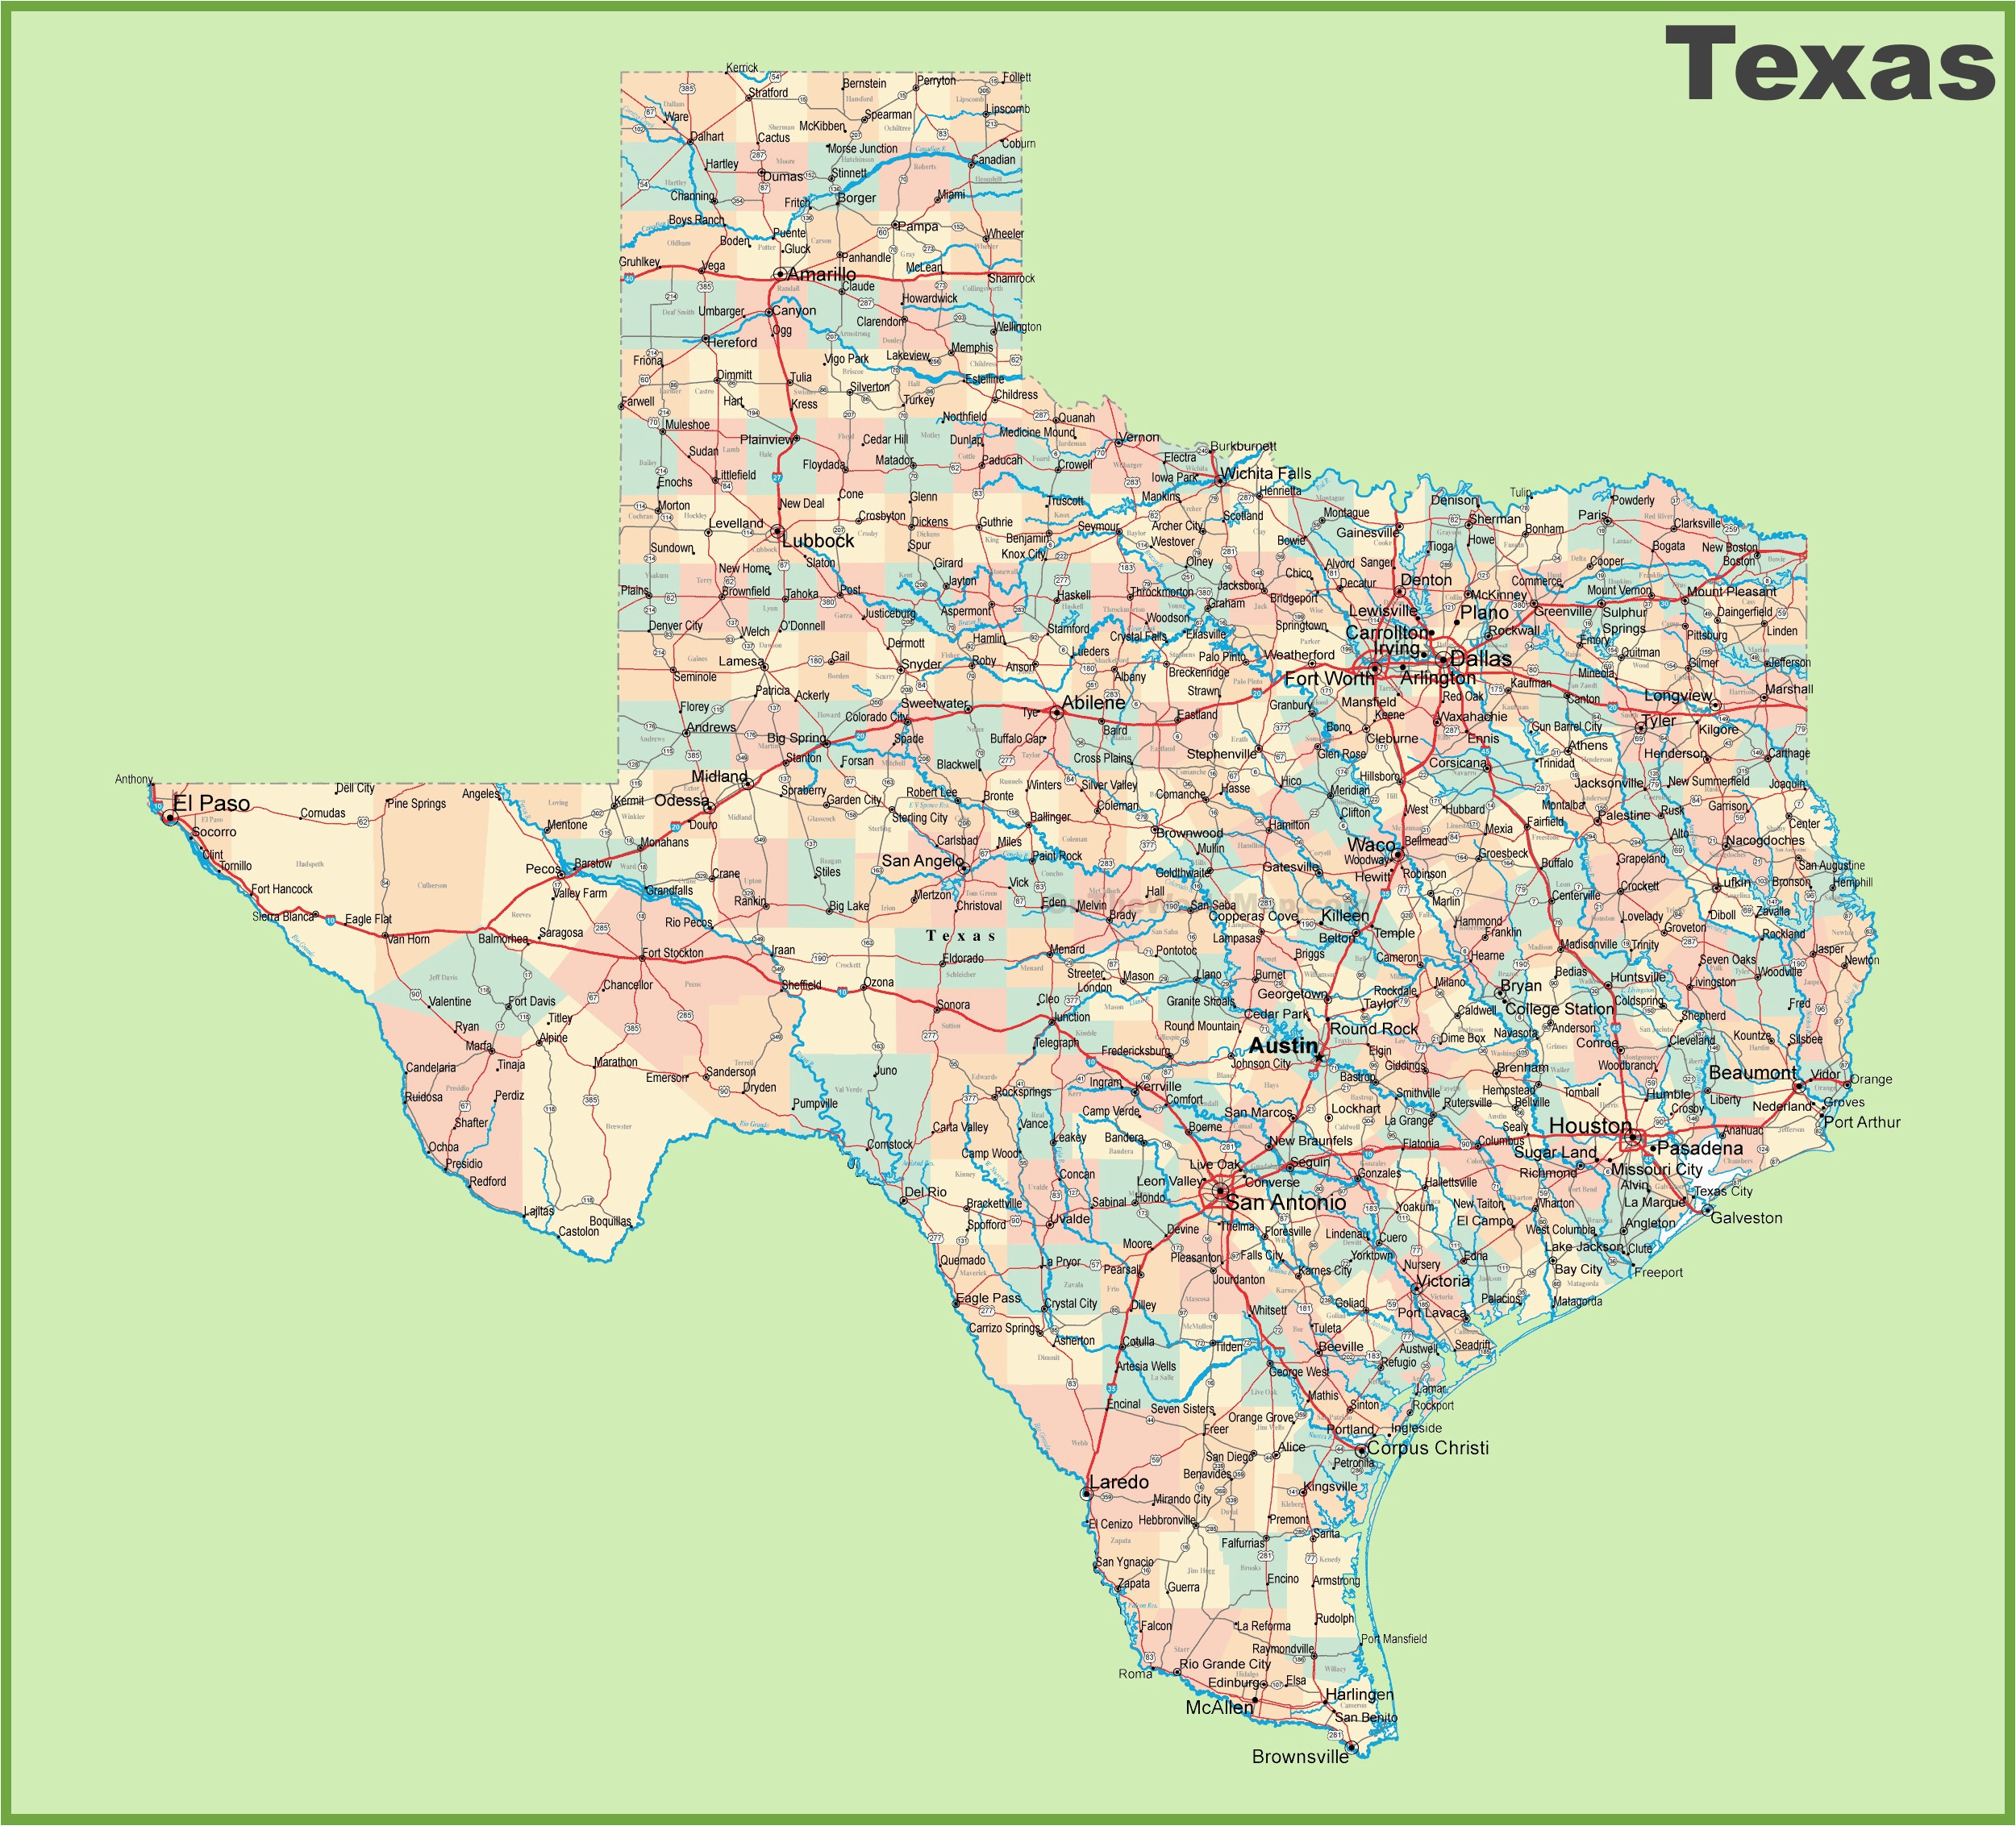 Texas Road Map atlas Road Map Of Texas with Cities